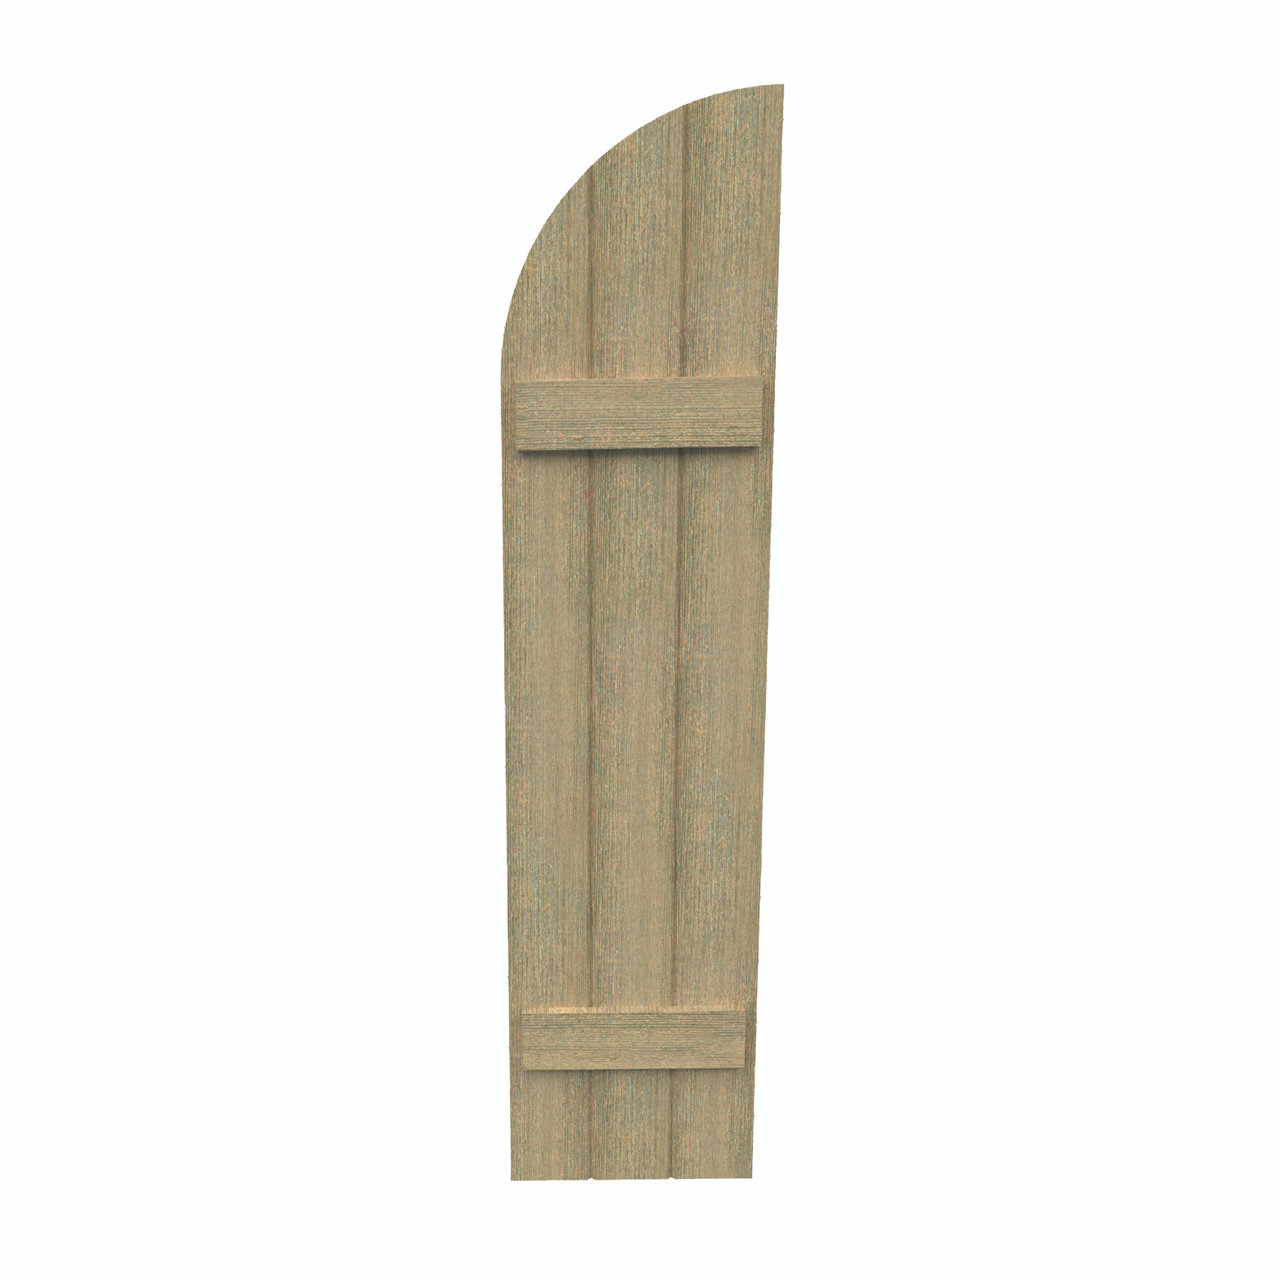 14 inch by 59 inch Quarter Round Shutter with 3-Boards